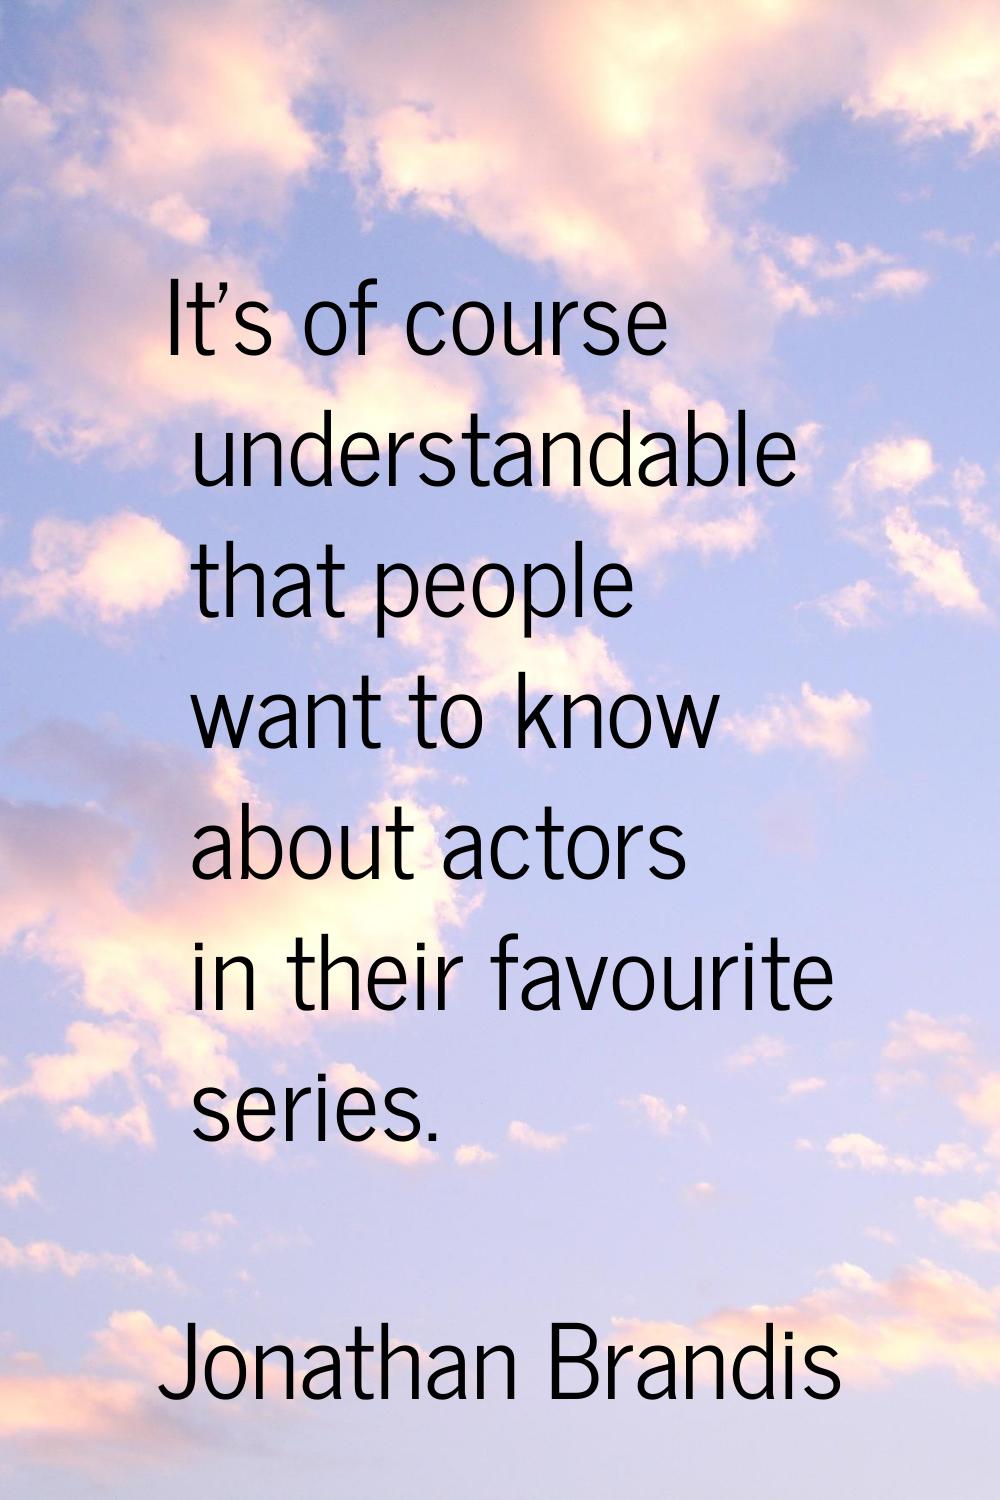 It's of course understandable that people want to know about actors in their favourite series.